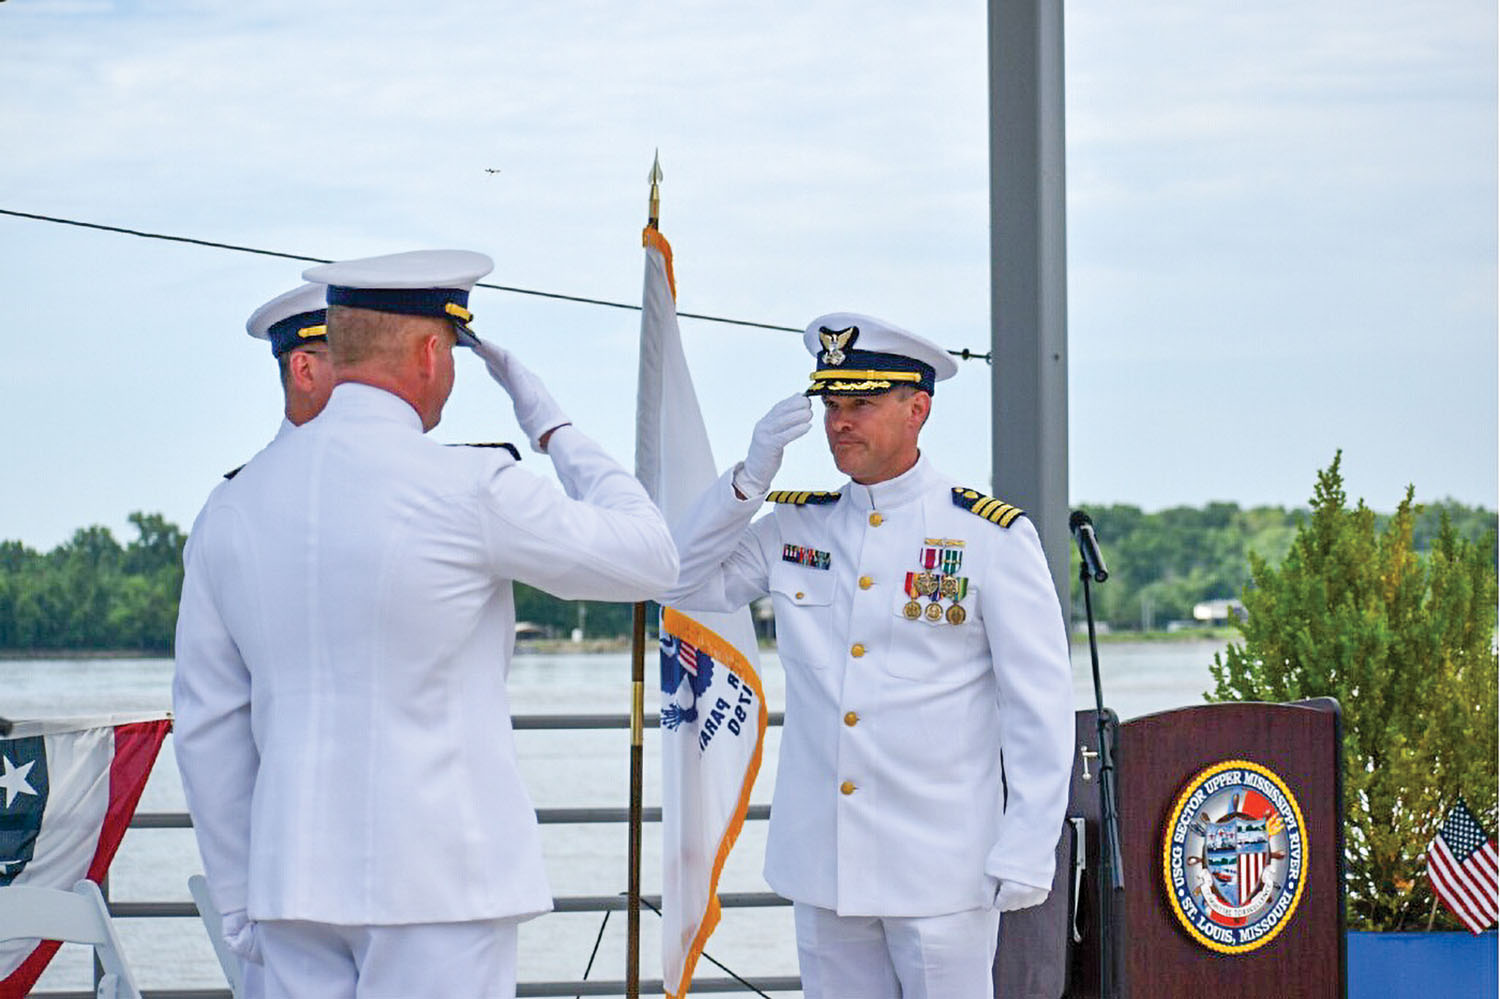 Capt. Andrew Bender (right) relieves Captain Richard “Mick” Scott (left) as Sector Upper Mississippi River commander. (Photo courtesy of Coast Guard Sector Upper Mississippi River)